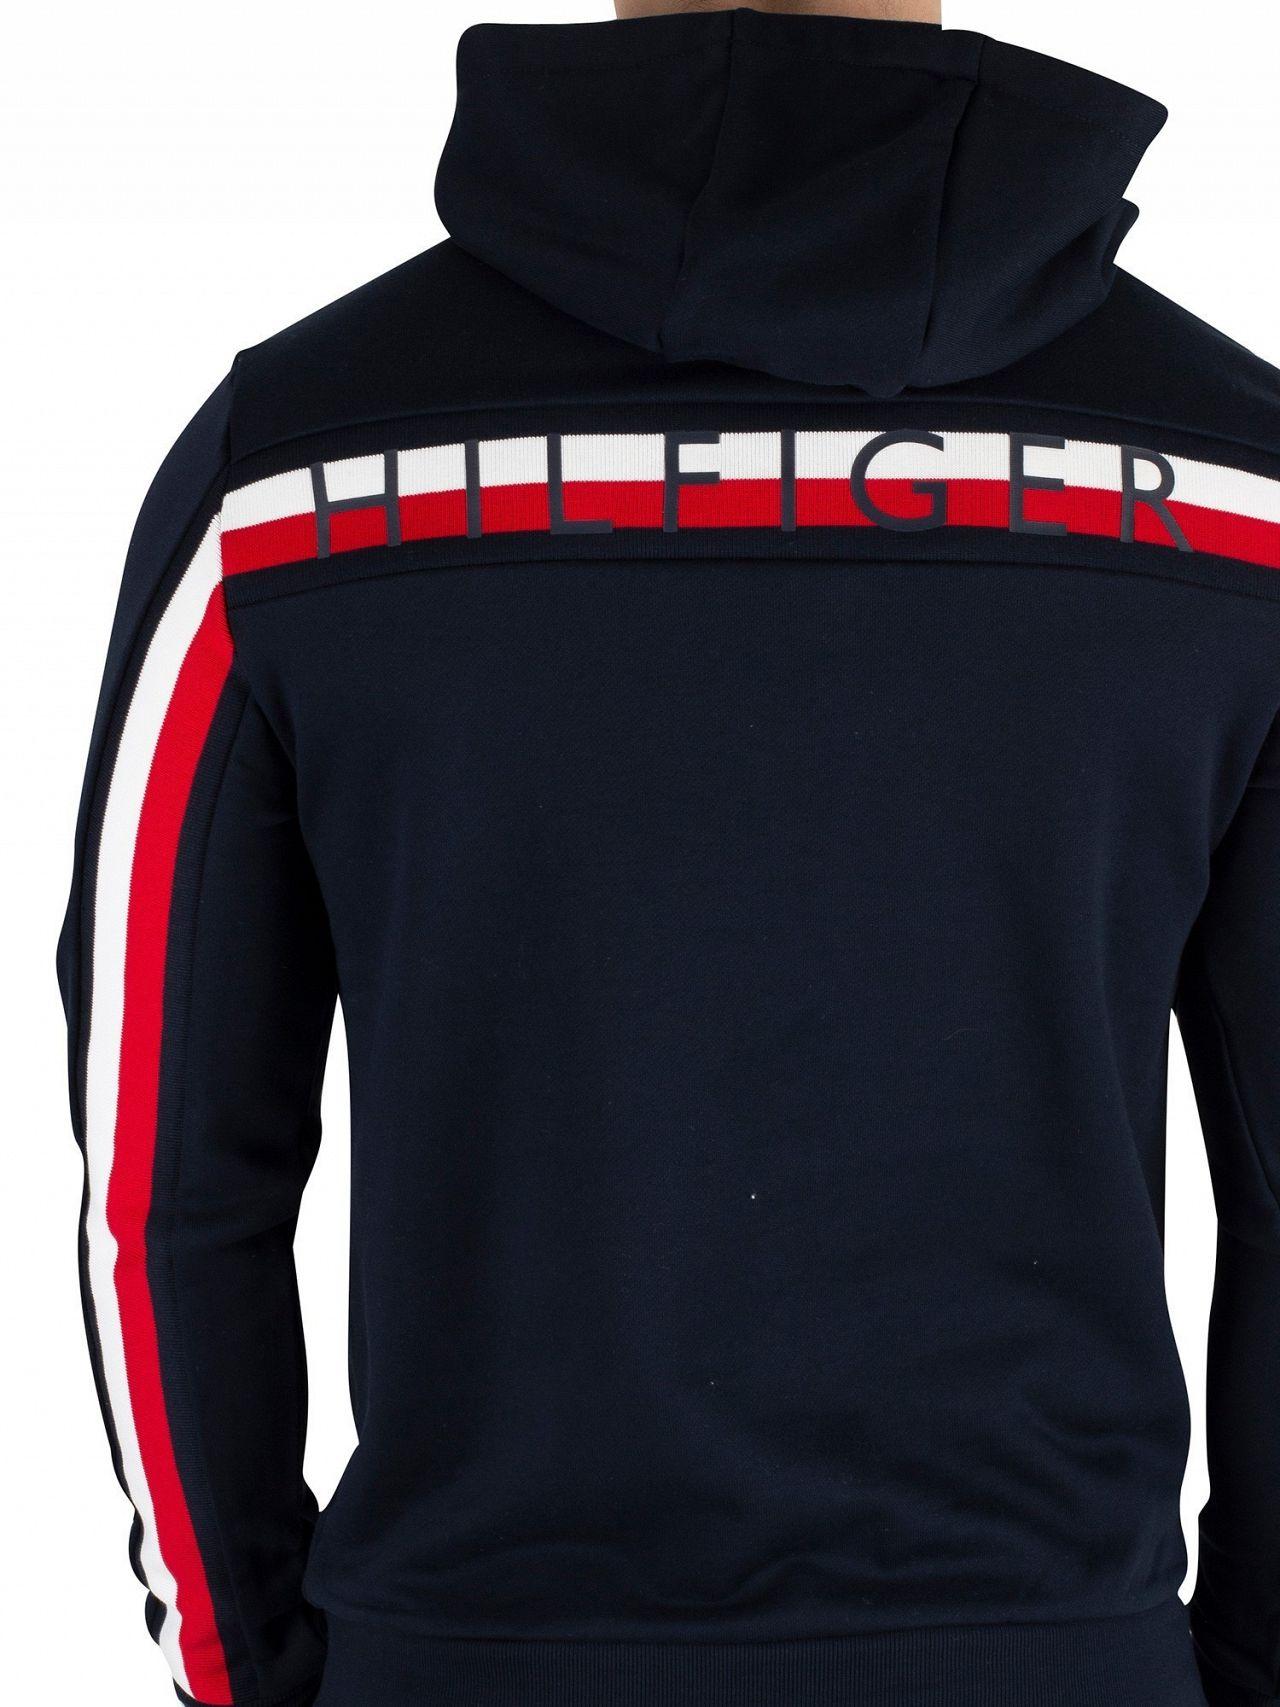 tommy hilfiger sky captain sweater